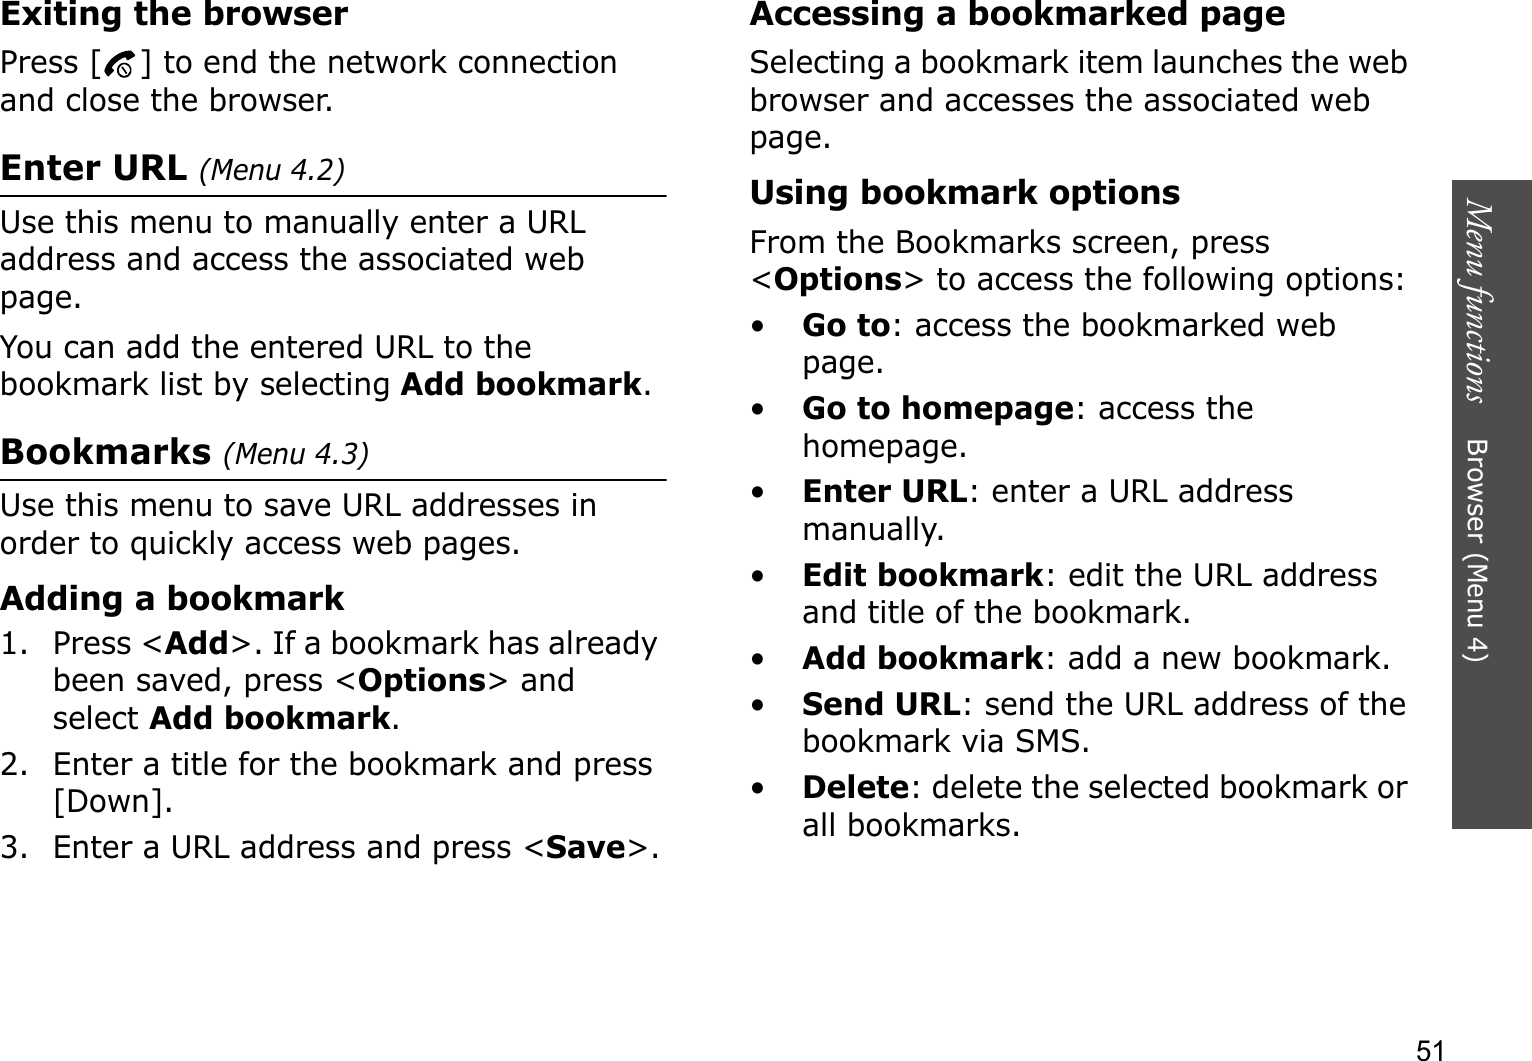 Menu functions    Browser (Menu 4)51Exiting the browserPress [ ] to end the network connection and close the browser.Enter URL (Menu 4.2)Use this menu to manually enter a URL address and access the associated web page.You can add the entered URL to the bookmark list by selecting Add bookmark.Bookmarks (Menu 4.3)Use this menu to save URL addresses in order to quickly access web pages.Adding a bookmark1. Press &lt;Add&gt;. If a bookmark has already been saved, press &lt;Options&gt; and select Add bookmark.2. Enter a title for the bookmark and press [Down].3. Enter a URL address and press &lt;Save&gt;.Accessing a bookmarked pageSelecting a bookmark item launches the web browser and accesses the associated web page.Using bookmark optionsFrom the Bookmarks screen, press &lt;Options&gt; to access the following options:•Go to: access the bookmarked web page.•Go to homepage: access the homepage.•Enter URL: enter a URL address manually.•Edit bookmark: edit the URL address and title of the bookmark.•Add bookmark: add a new bookmark.•Send URL: send the URL address of the bookmark via SMS.•Delete: delete the selected bookmark or all bookmarks.